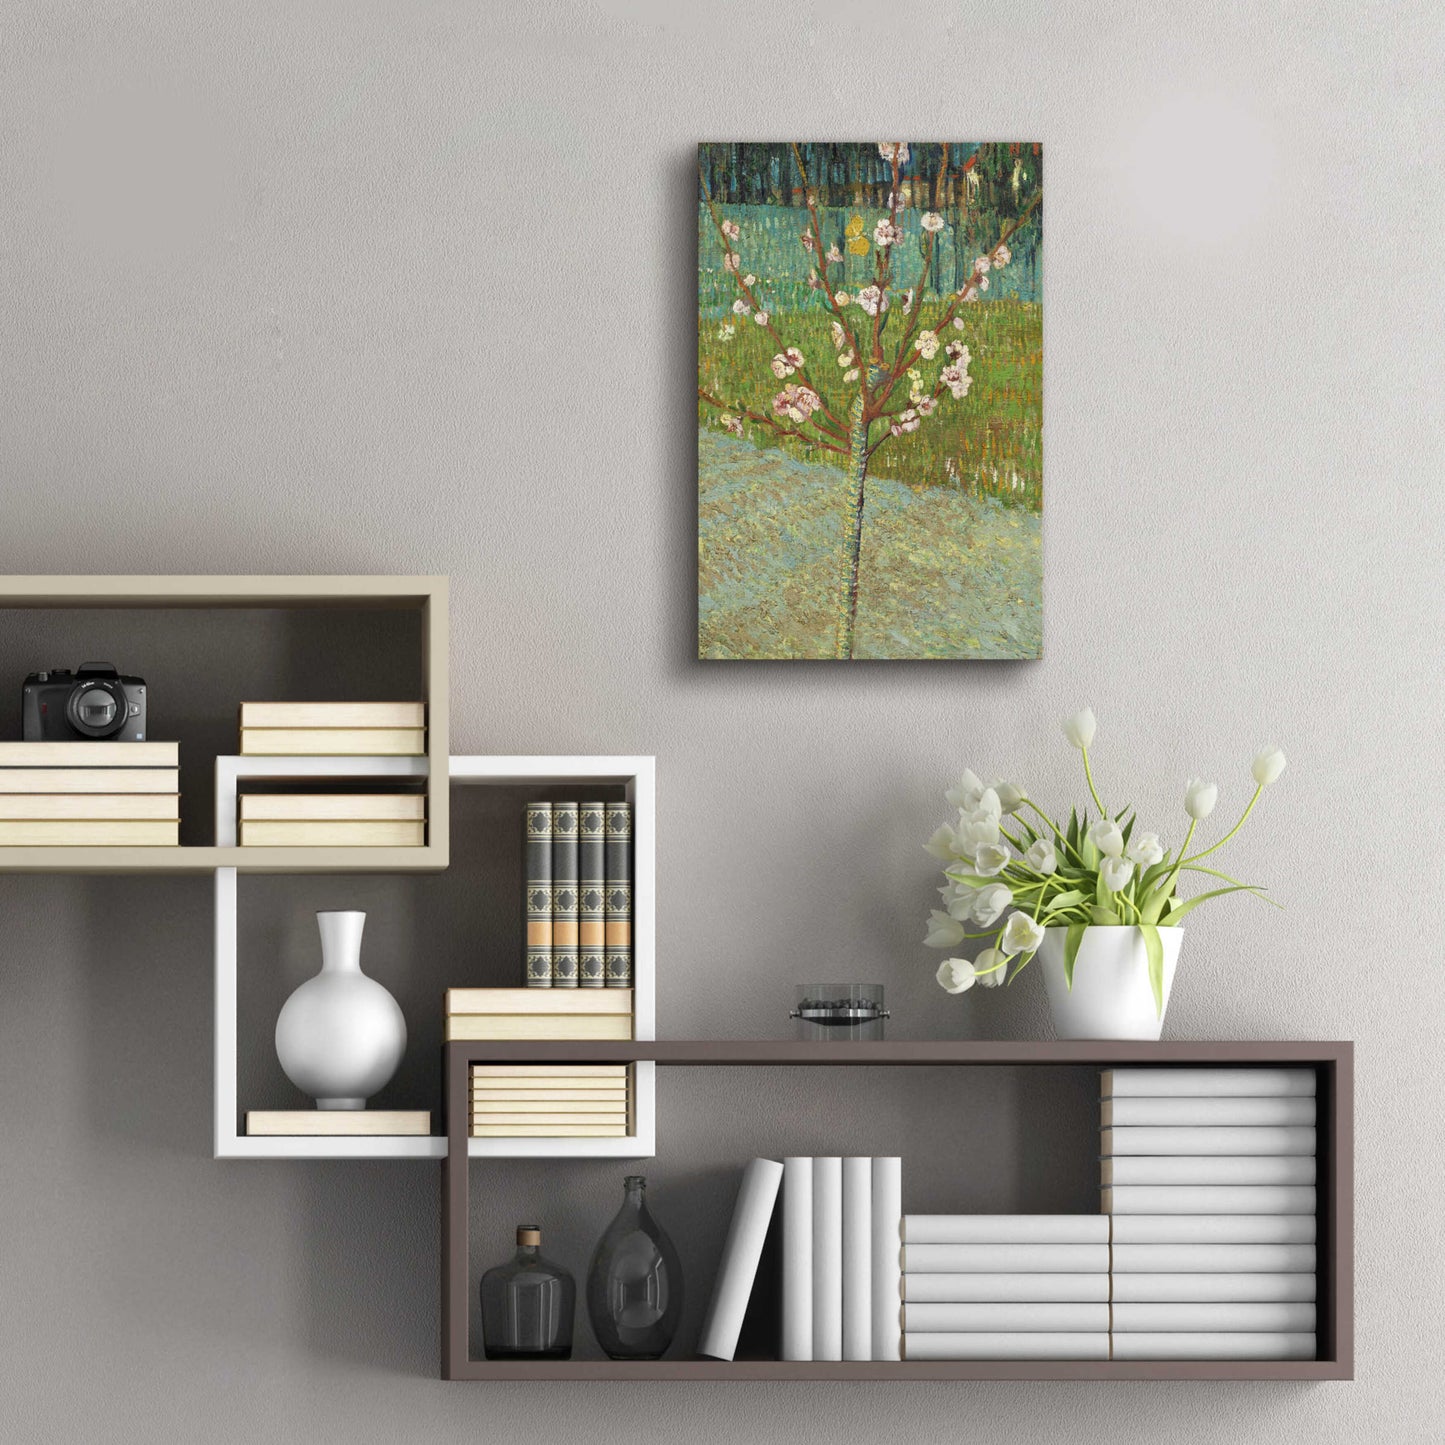 Epic Art 'Peach Tree In Blossom' by Vincent Van Gogh, Acrylic Glass Wall Art,16x24